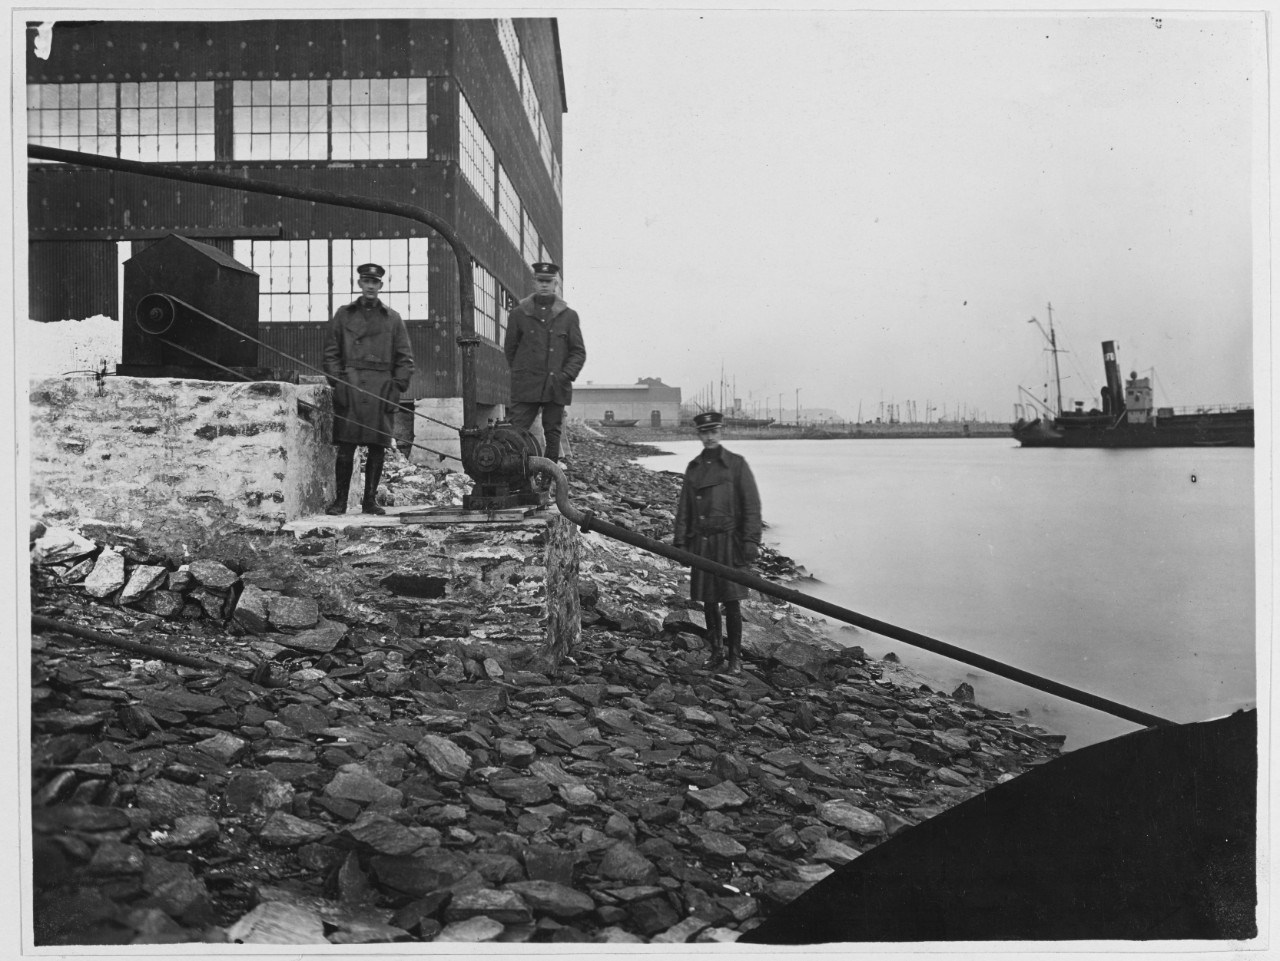 Men stand near coastline, next to a Pump for handling of sea water for the condensing and scrubbing of Hydrogen gas. Brest, France, 1917 - 1919